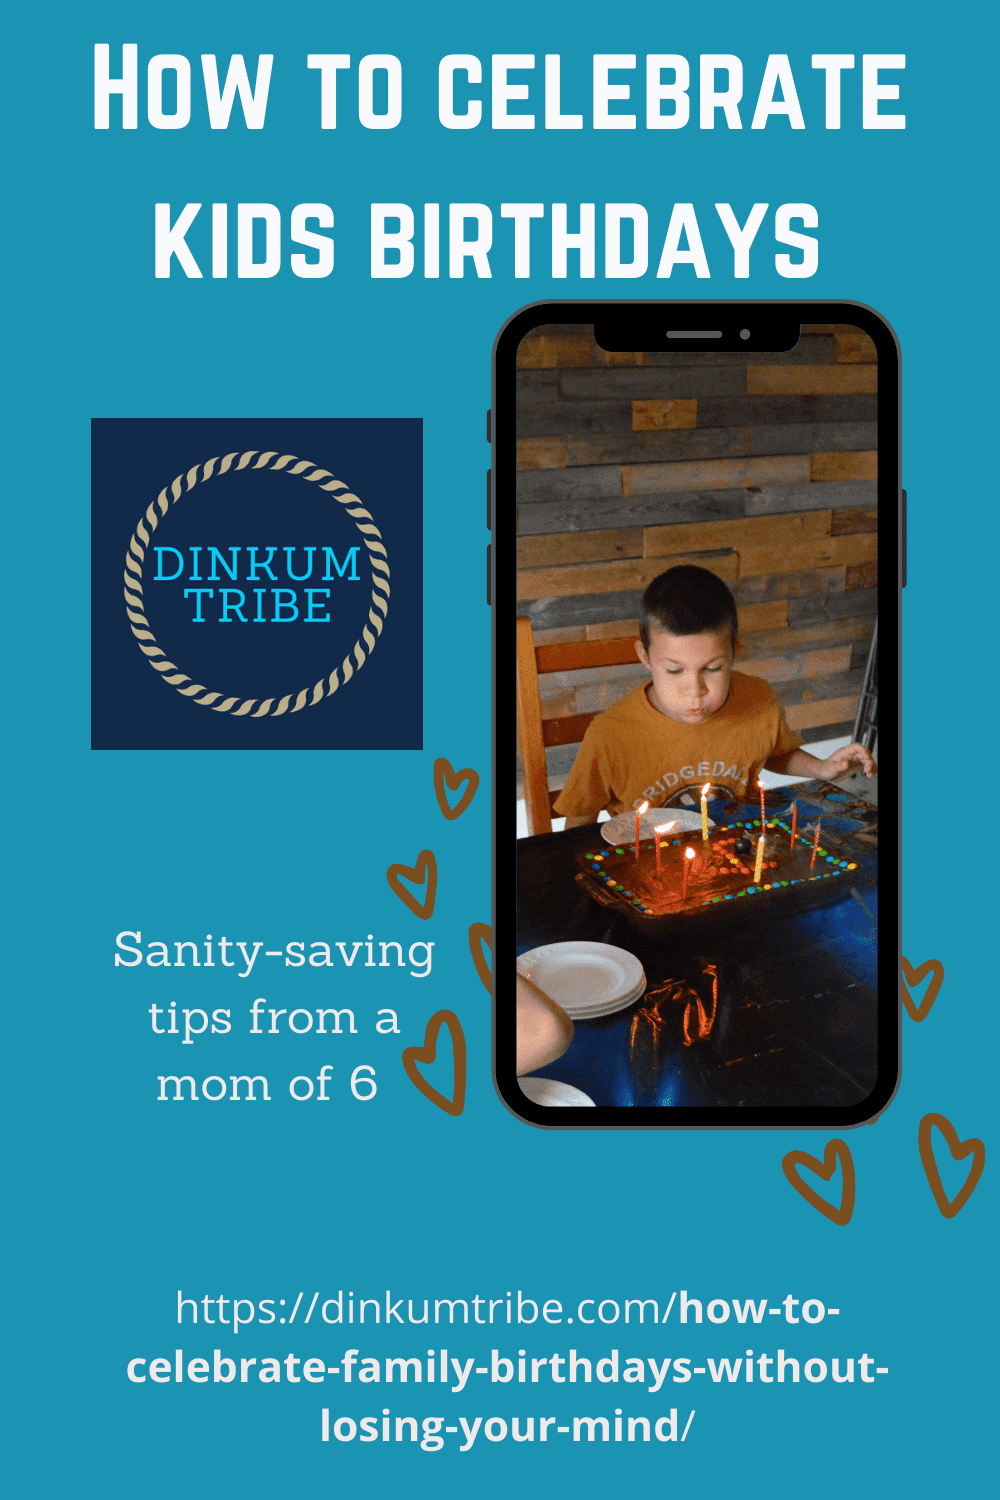 pinnable image of Boy blowing out candles on phone image. Dinkum Tribe logo and URL and text says how to celebrate kids birthdays; sanity saving tips from a mom of 6